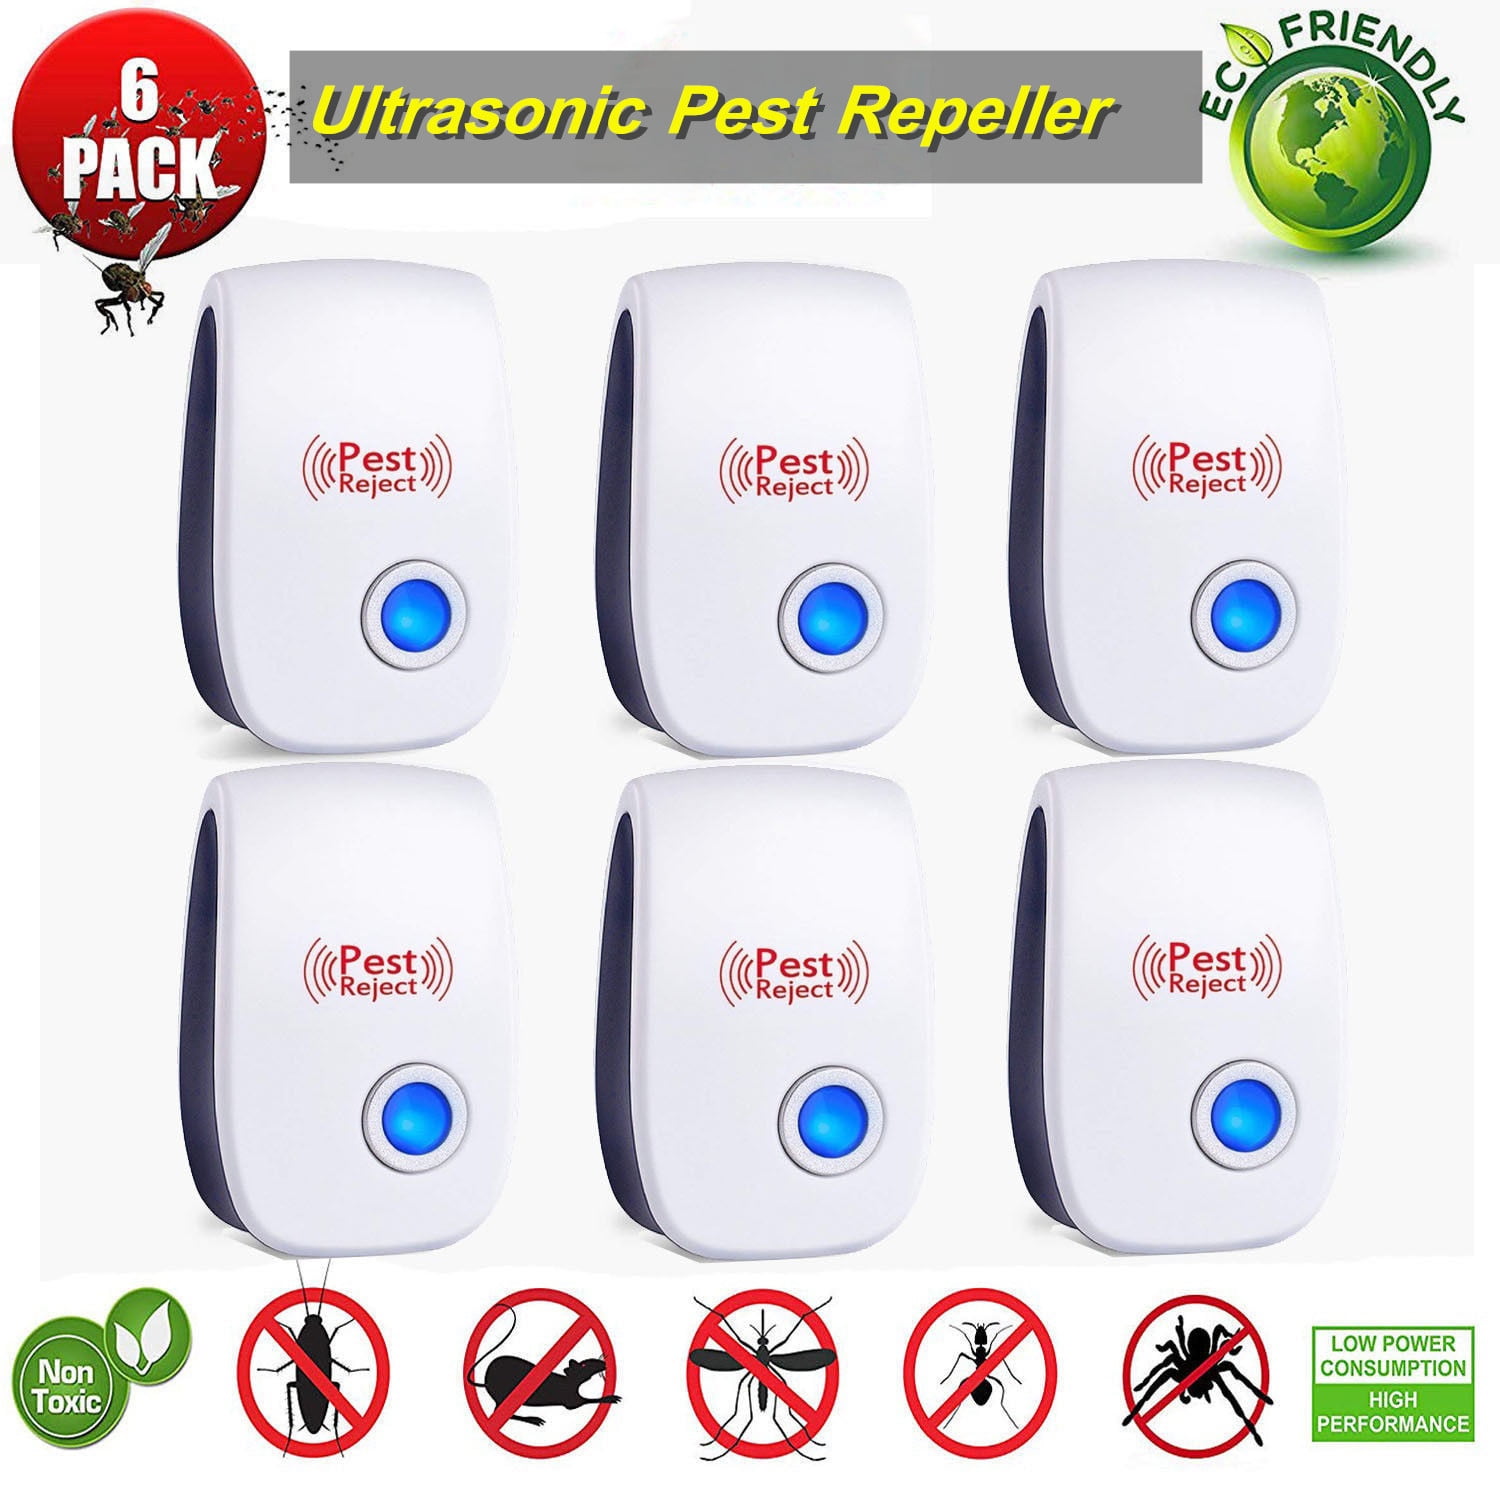 6 Pack Ultrasonic Pest Repeller Control Electronic Repellent Mice Rat Reject USA 